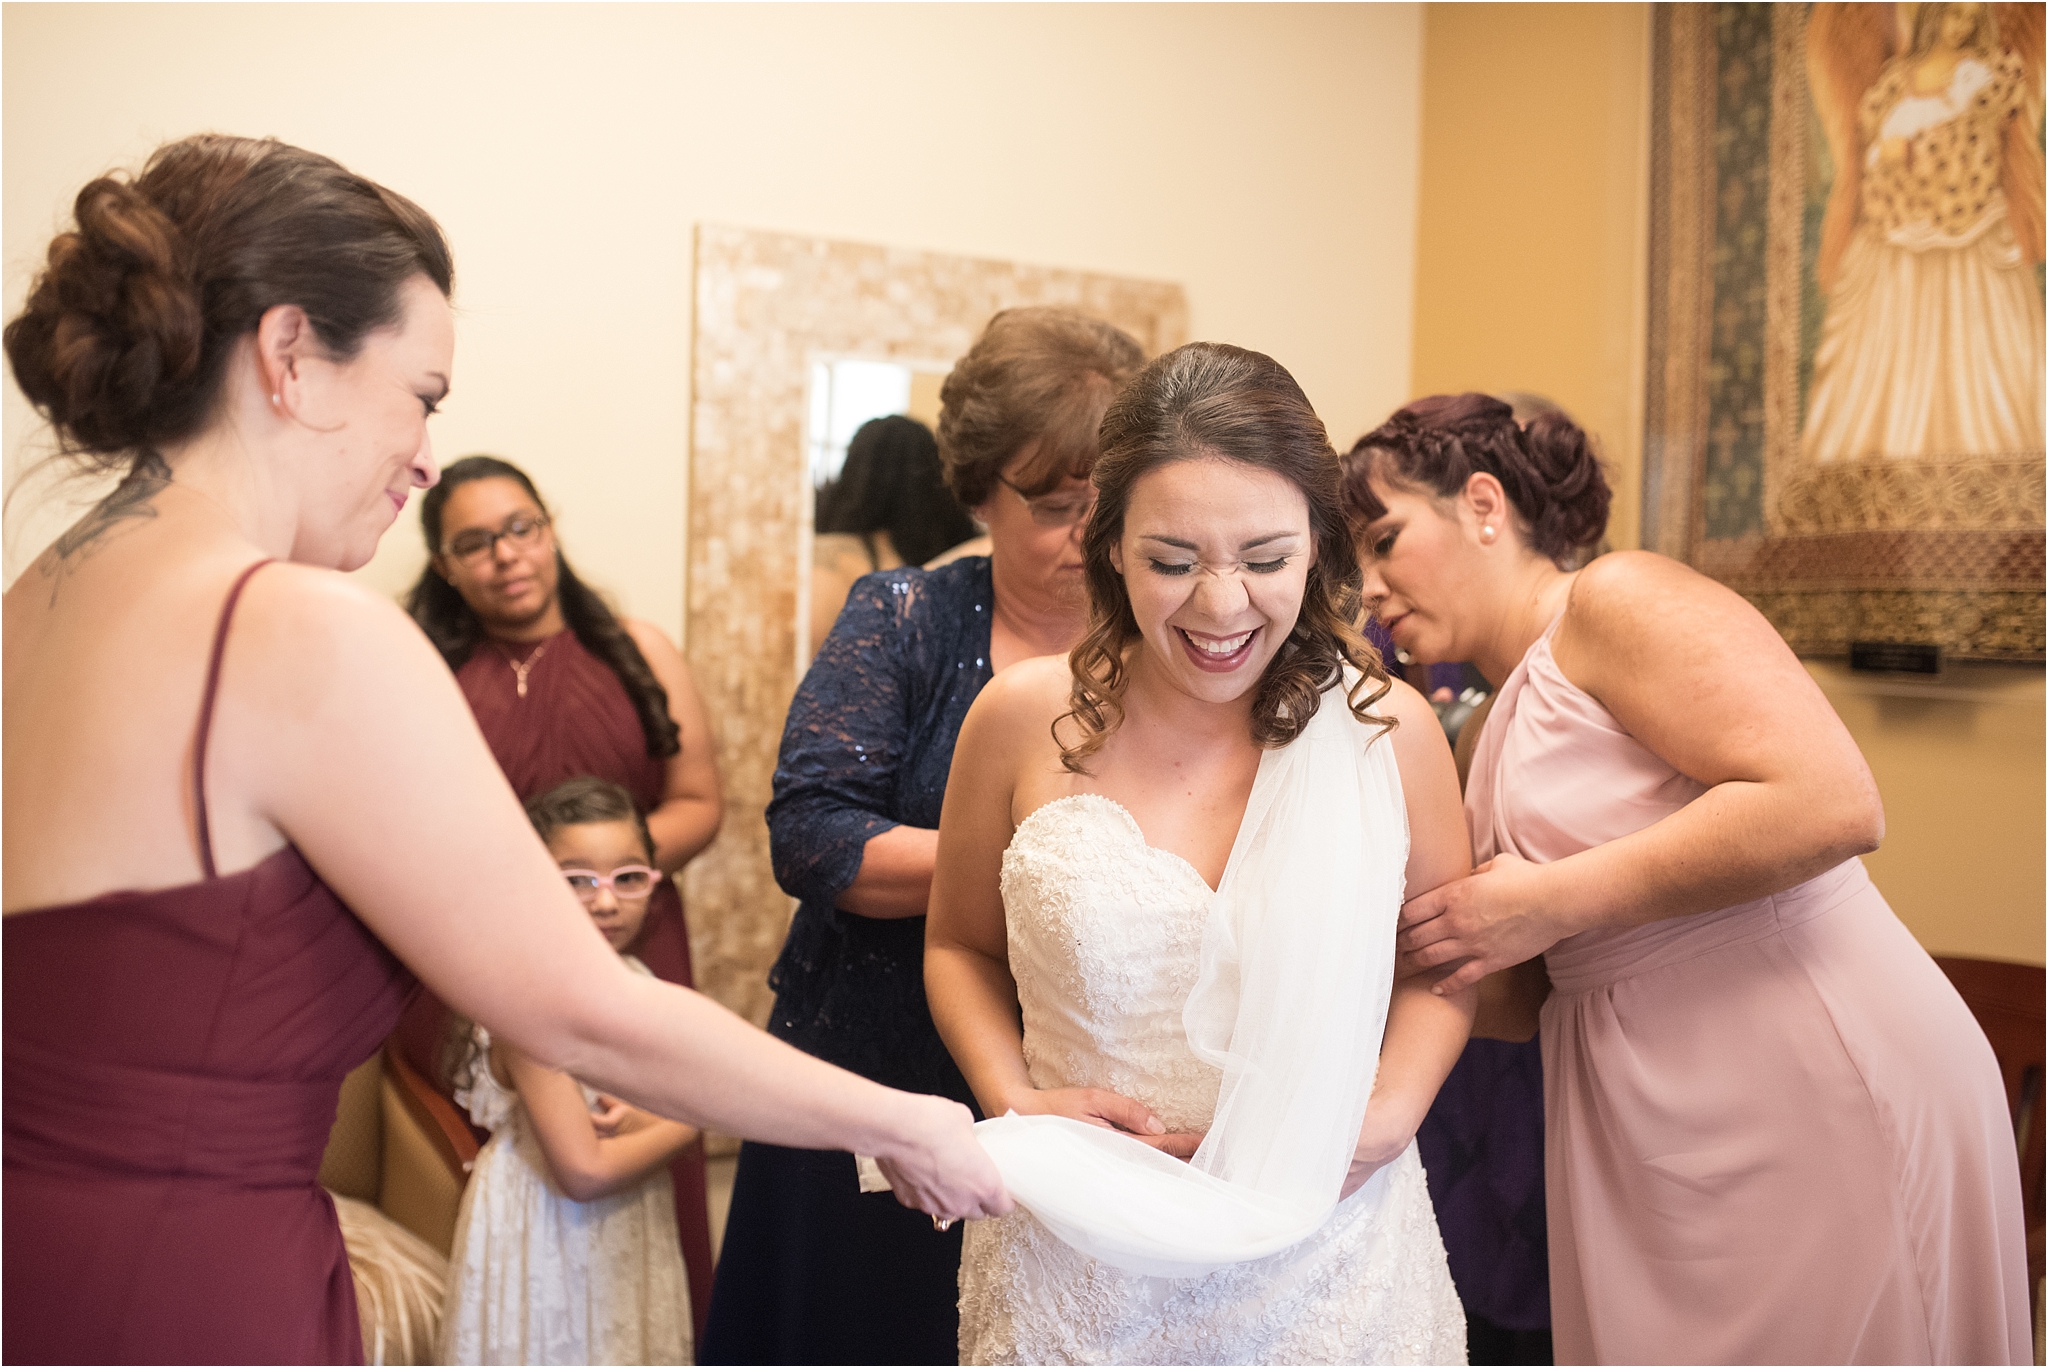 kayla kitts photography - albuquerque wedding photographer - hairpins and scissors - a cake odyssey - new mexico wedding photographer_0011.jpg